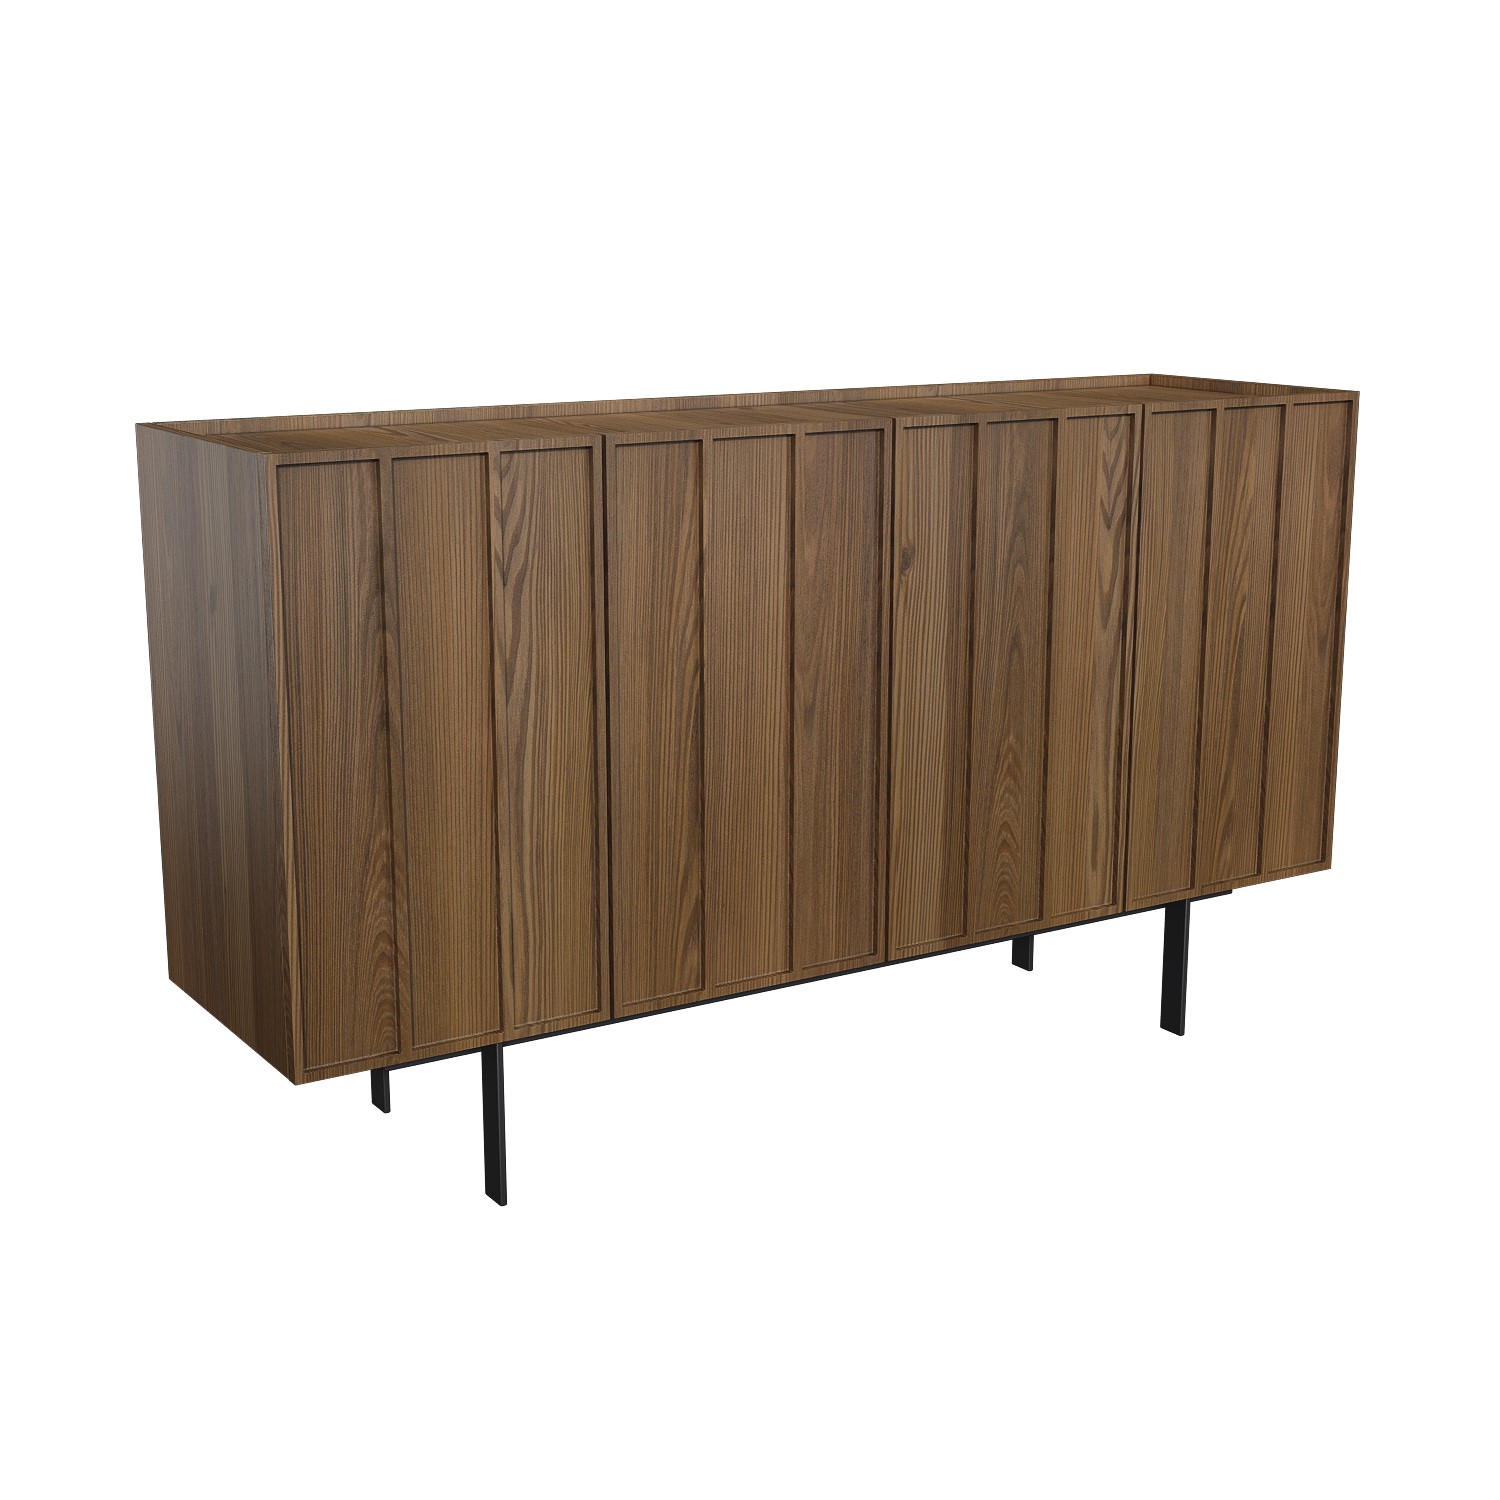 Read more about Large walnut modern sideboard with 4 doors helmer